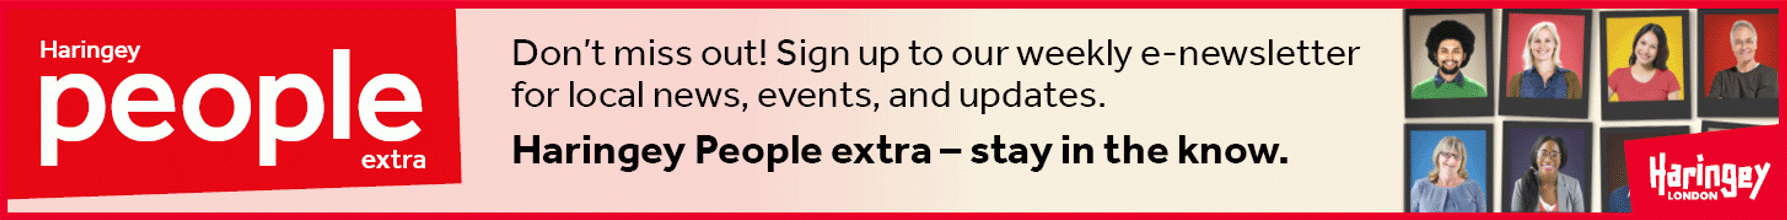 Sign up to receive our weekly newsletter